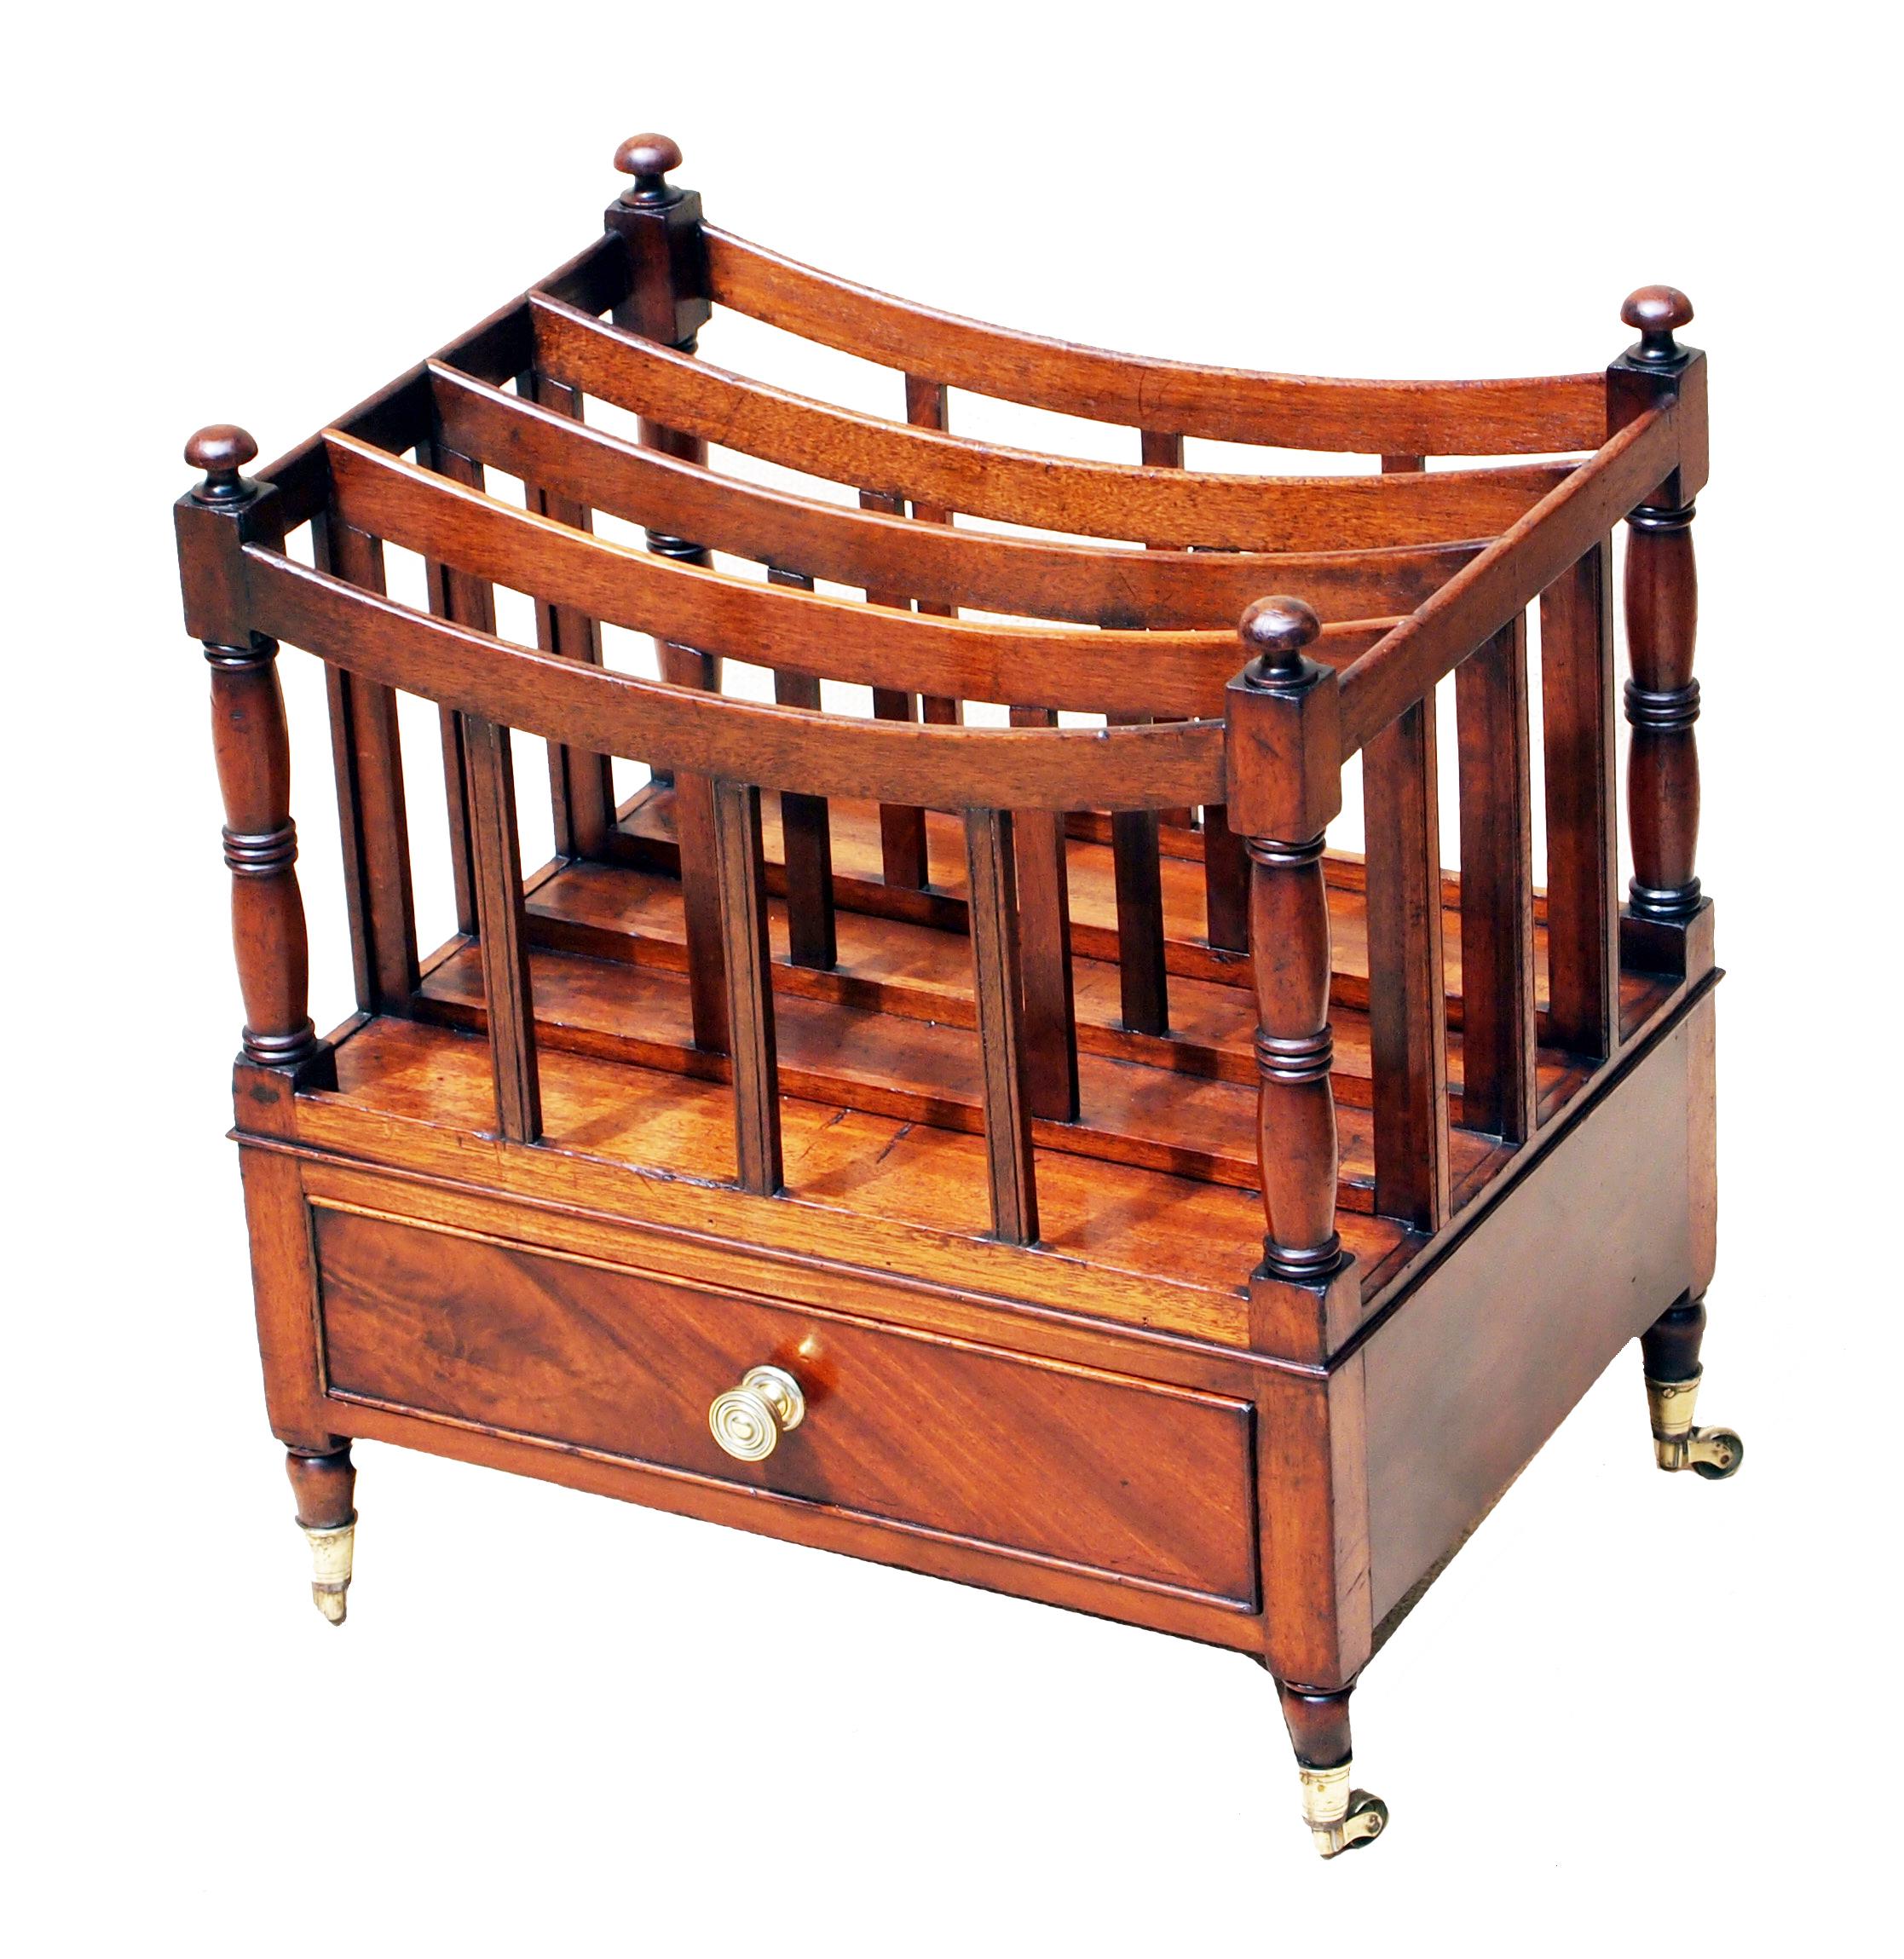 A Good Quality Regency Mahogany Boat Shaped
Canterbury Having Elegant Turned Upright Supports
And One Well Figured Frieze Drawer Raised On 
Elegant Turned Legs

(The name Canterbury is believed to have originated
for these articles when the Duke of